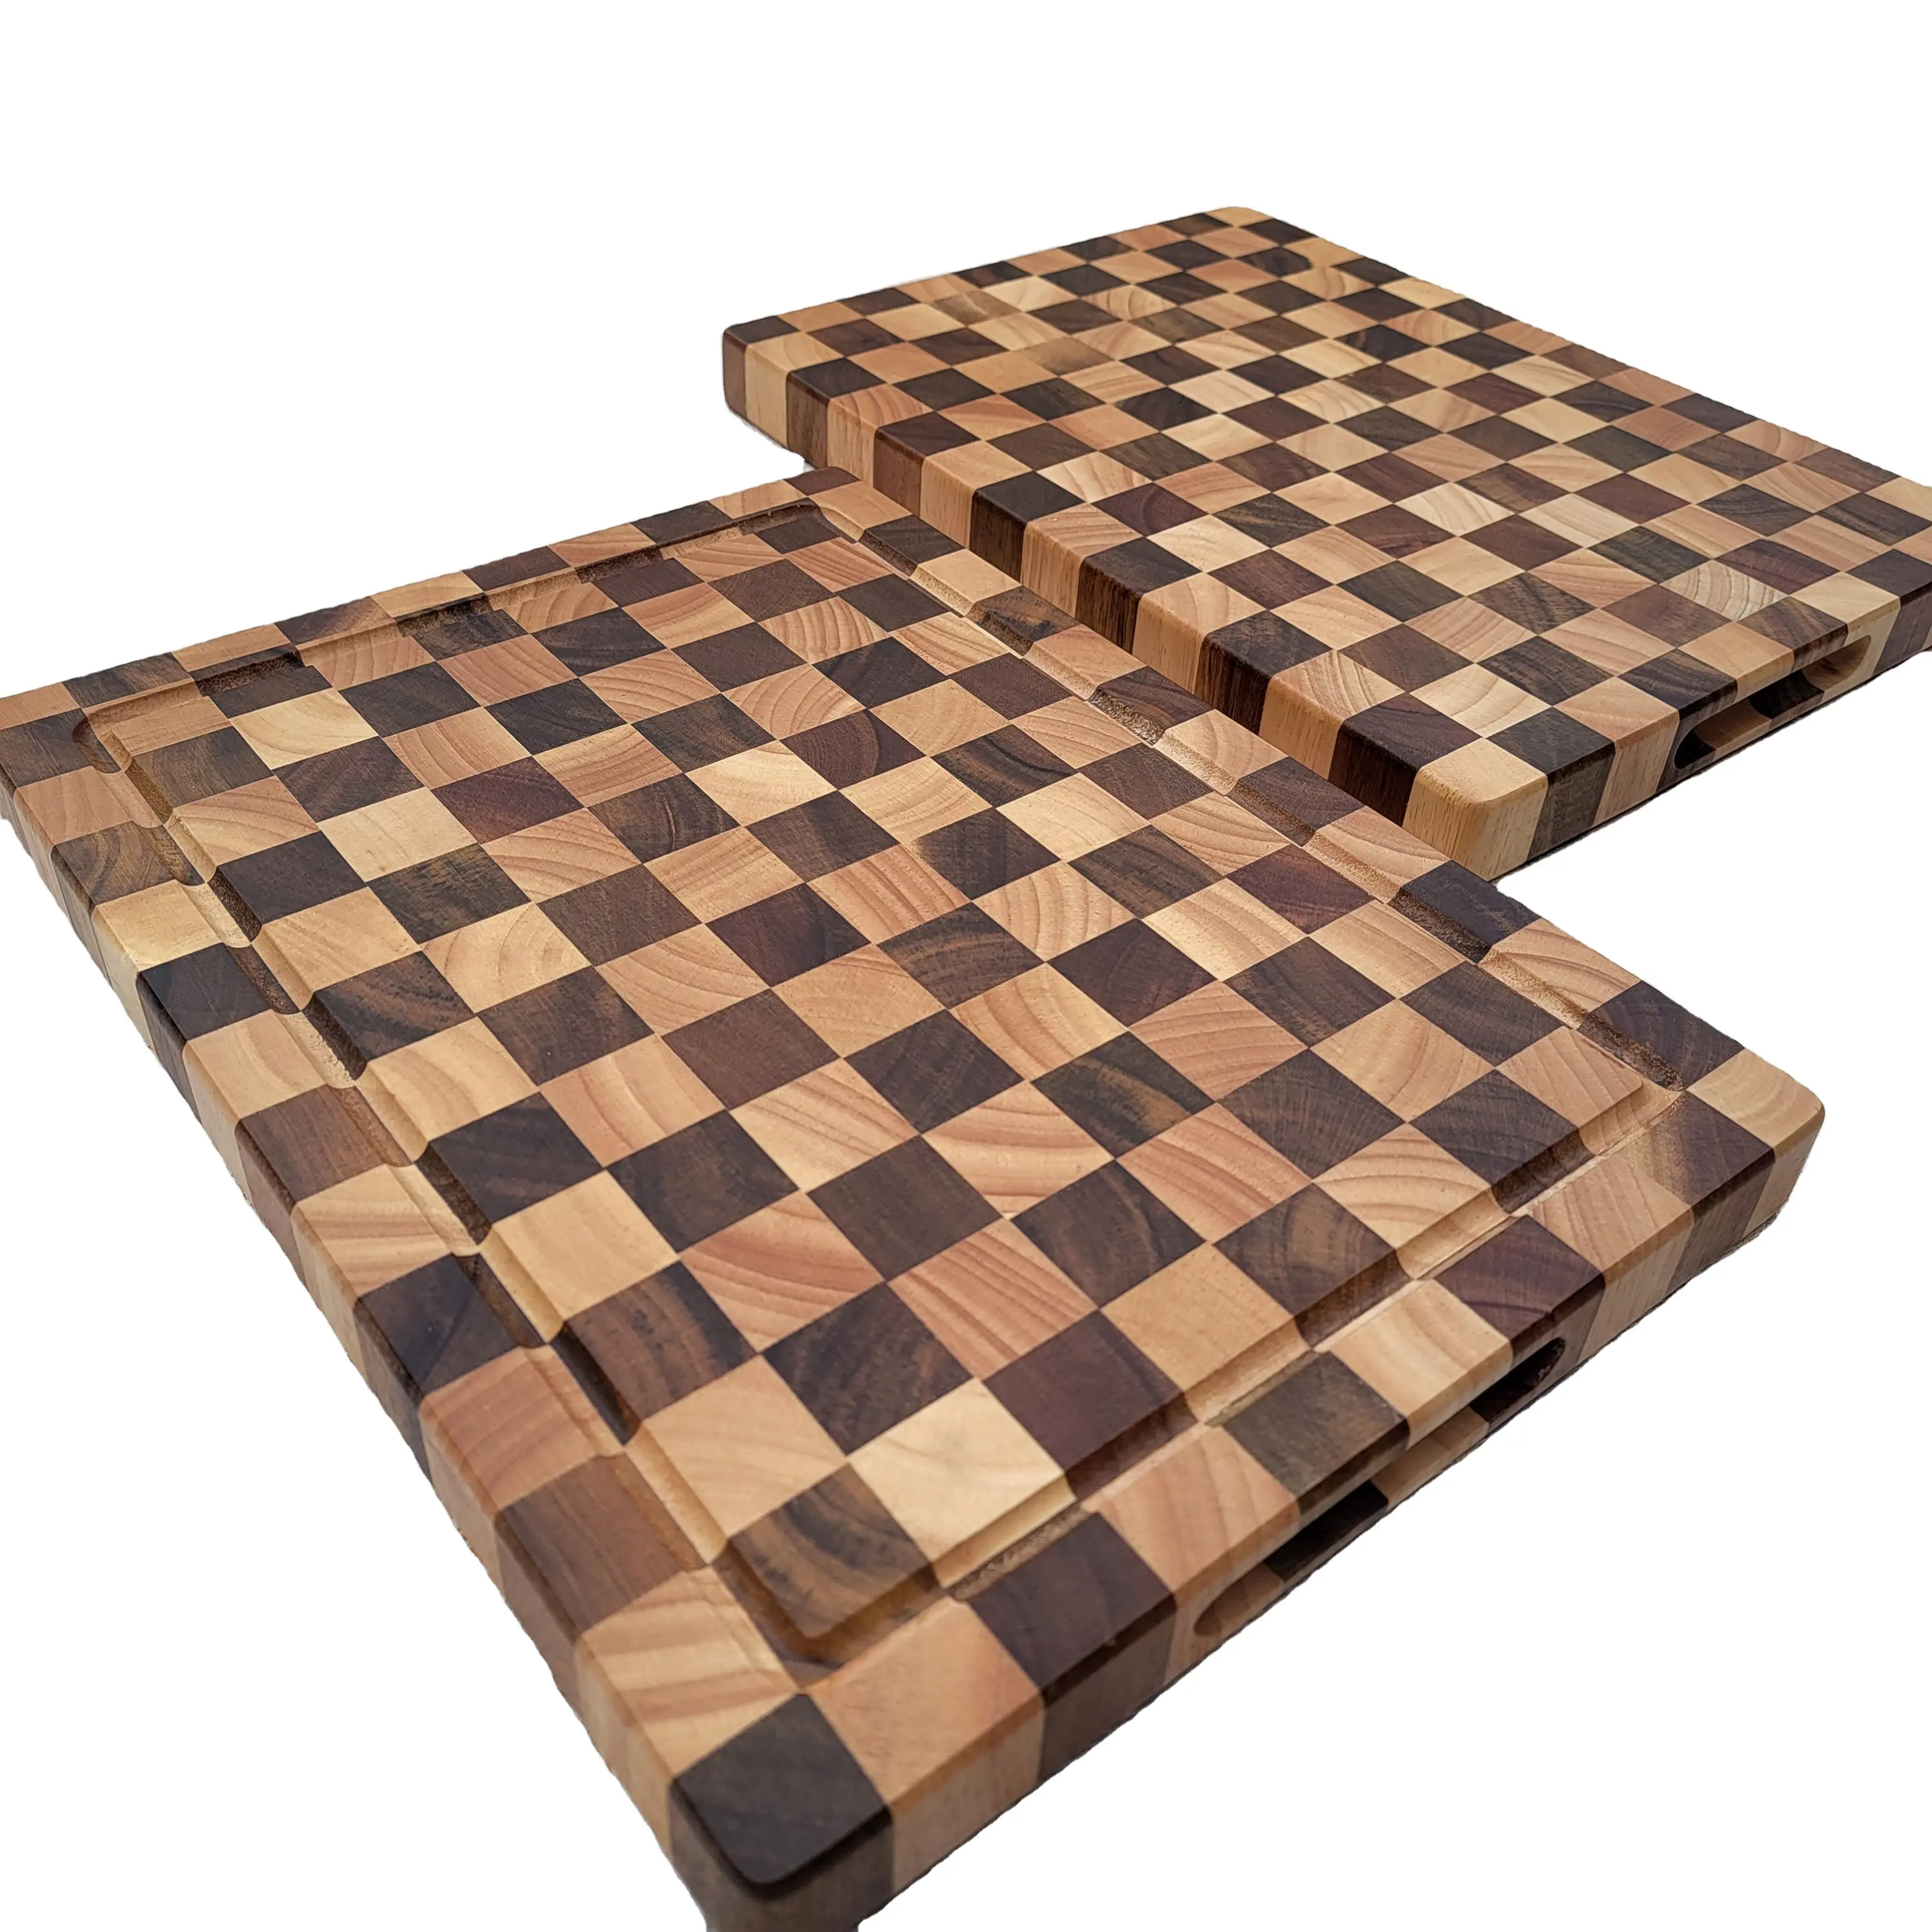 Meat Carving Board Acacia Wood Cutting Steak Paddle Cheese Board Serving tray Large Checkered Cutting Board